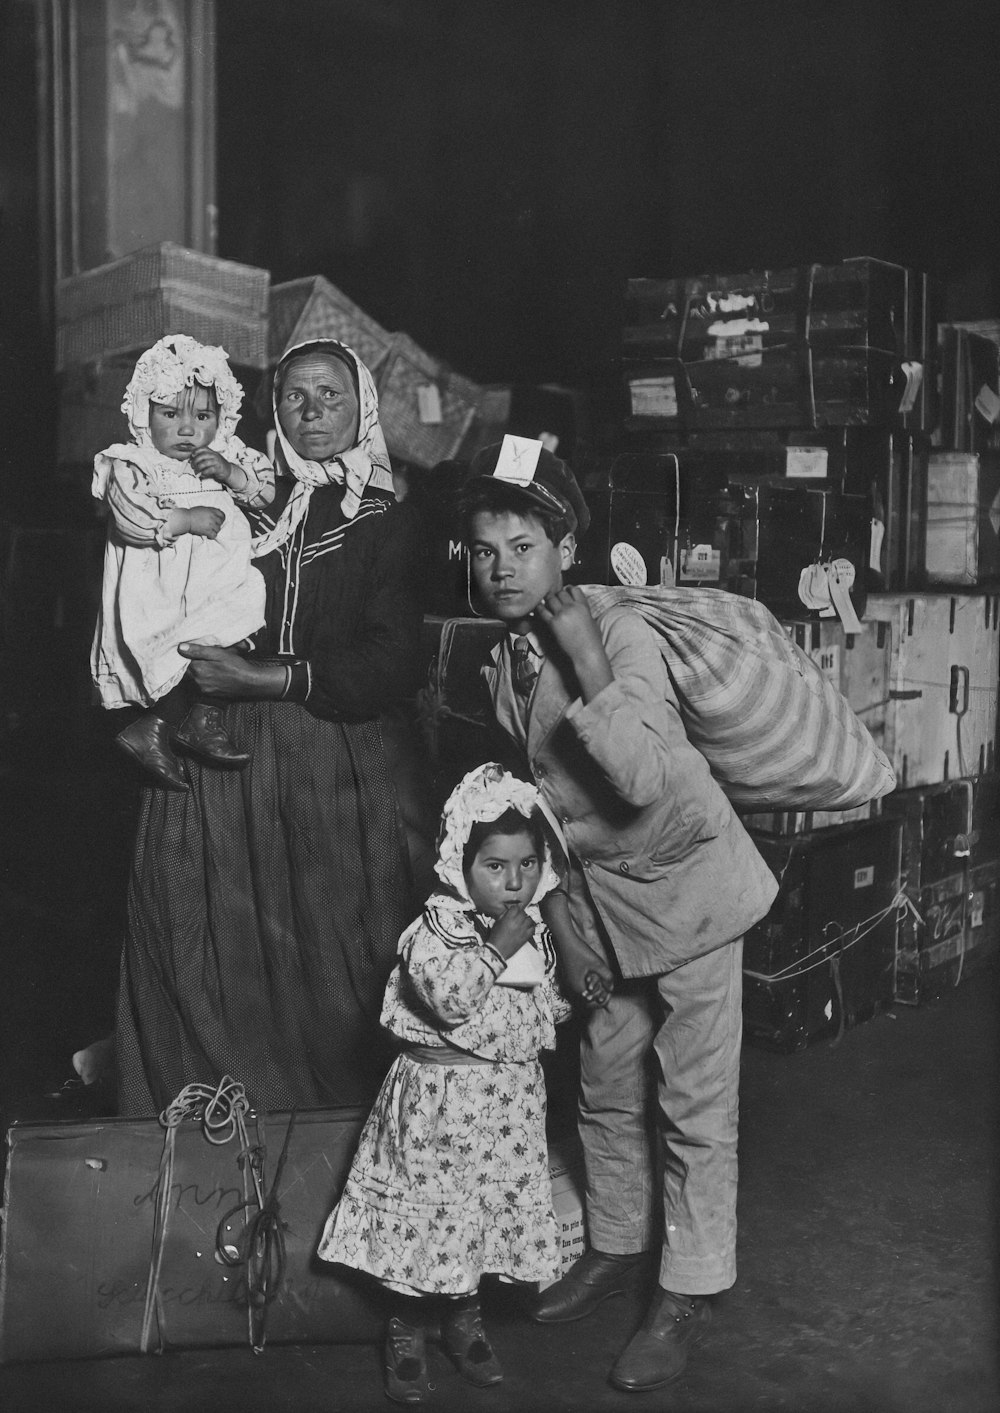 an old photo of a woman and two children